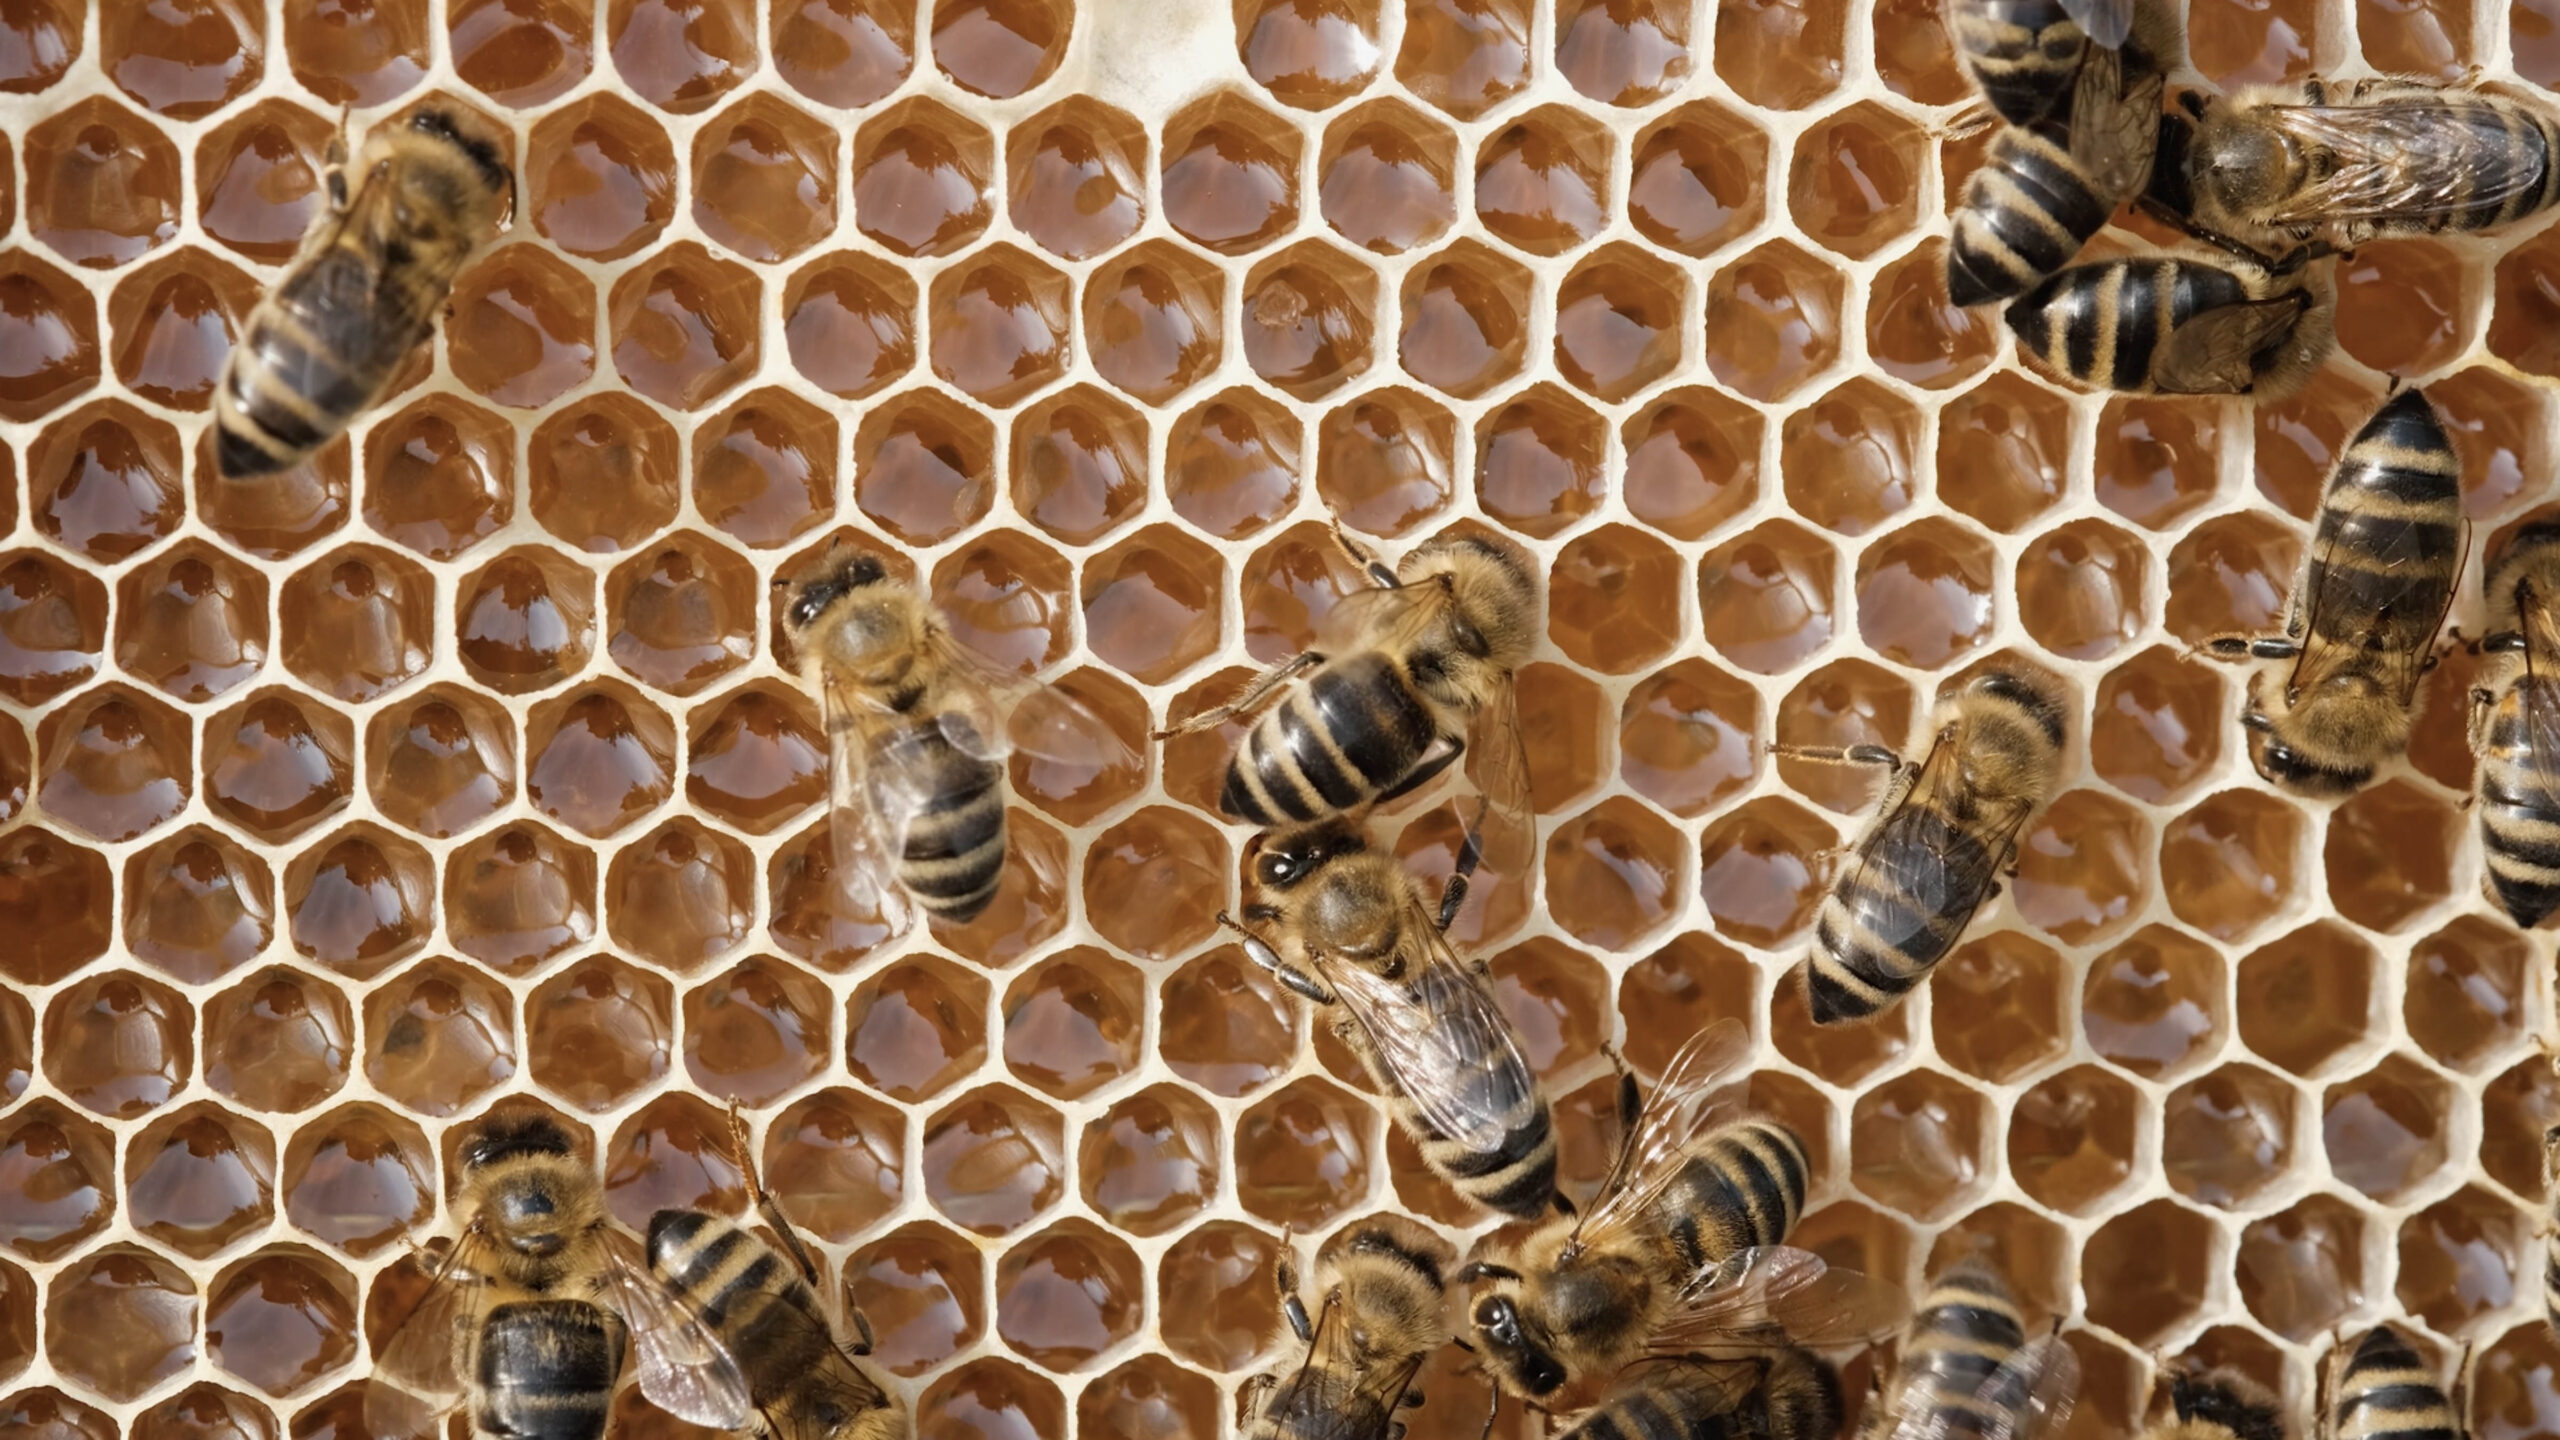 Honey bees building a comb for their hive.